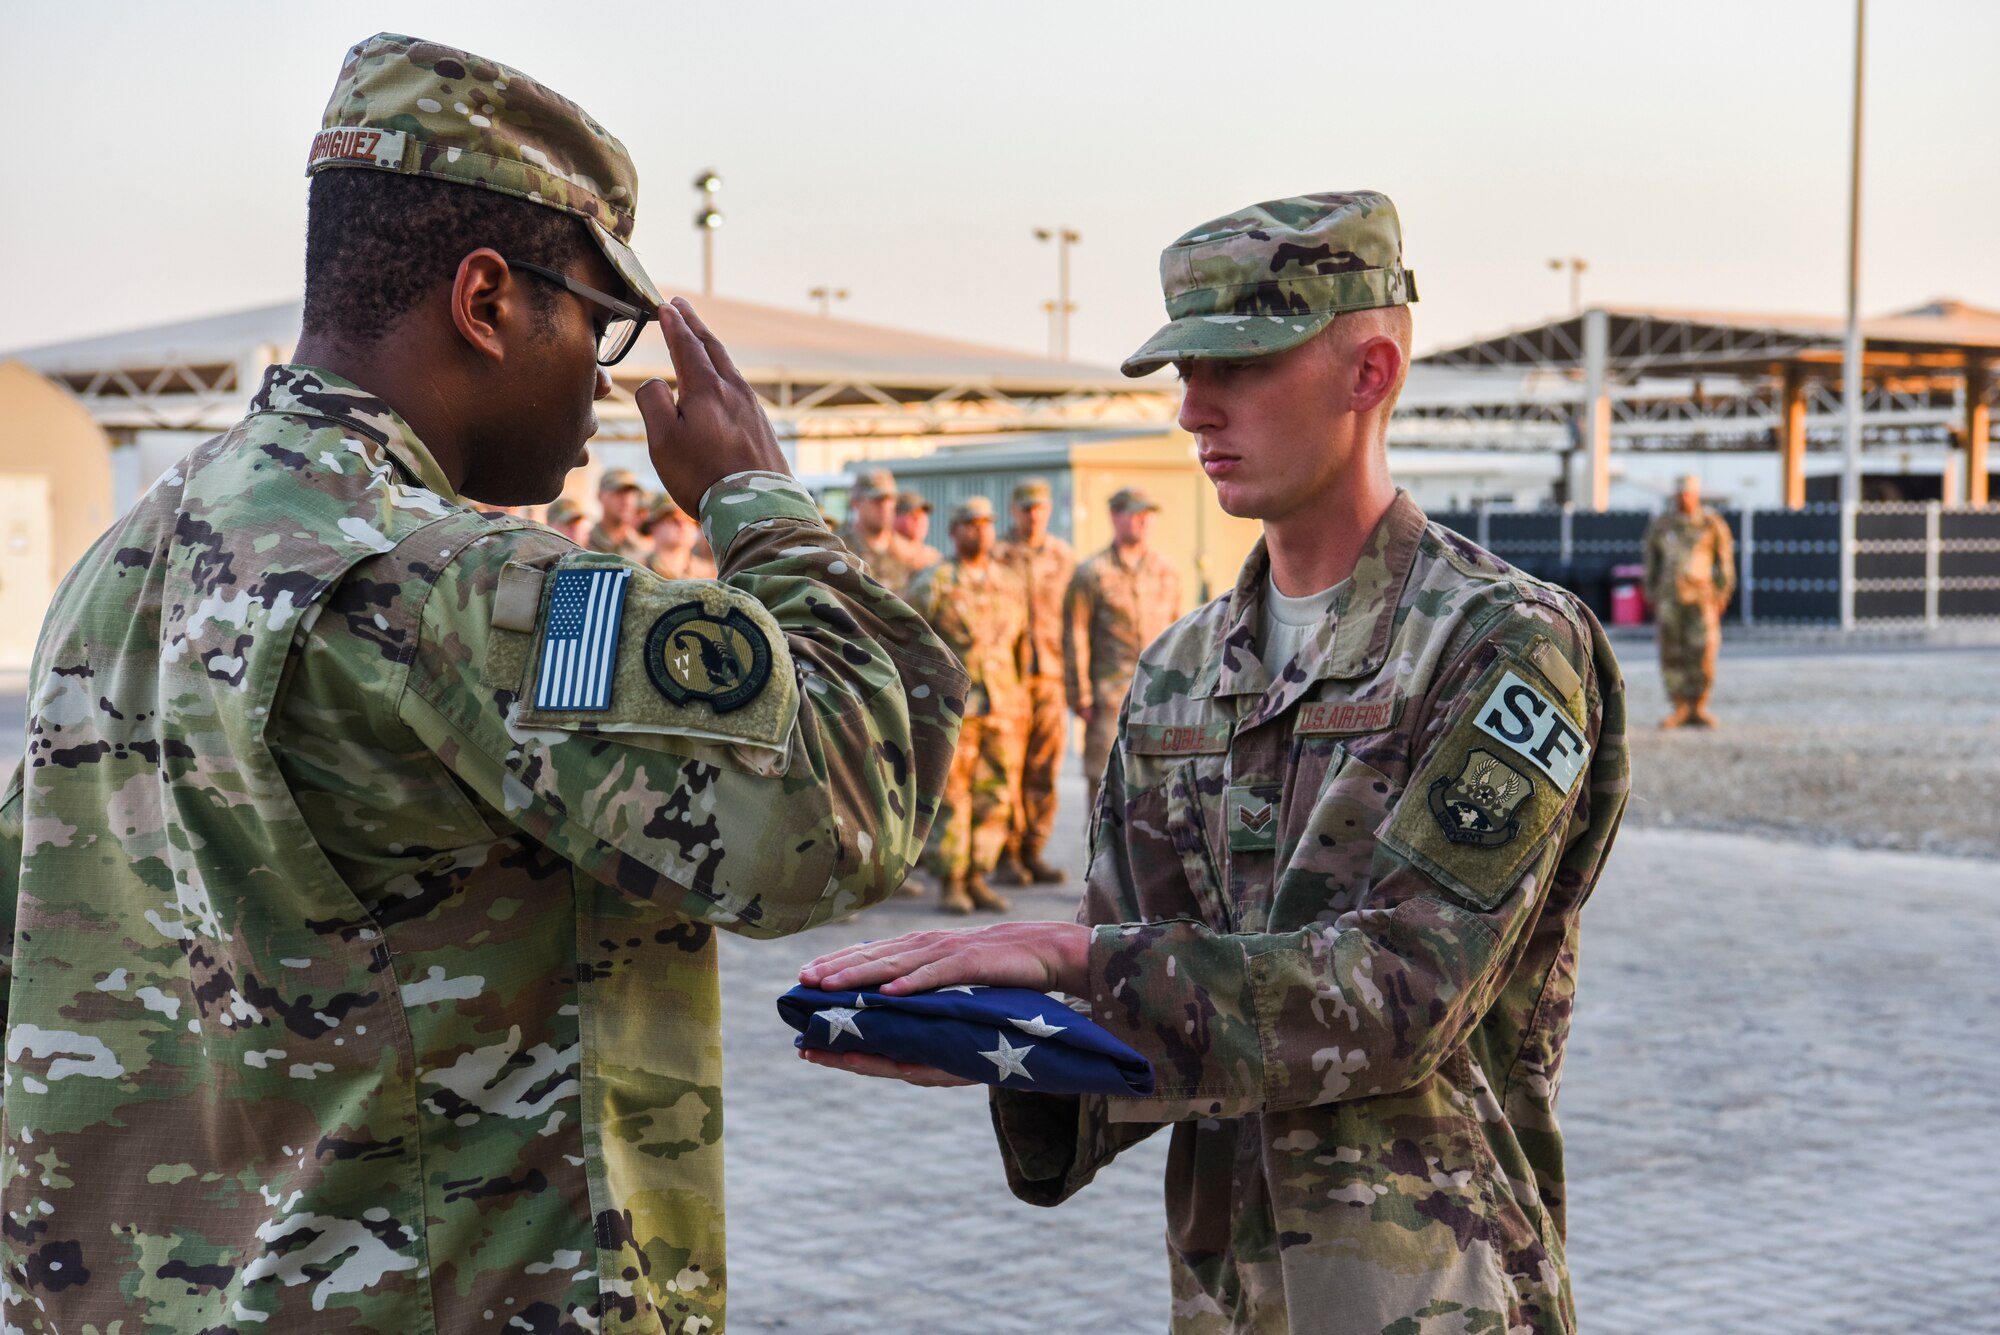 SrA William Rodriguez, 380th Expeditionary Security Forces Squadron, salutes the flag held by SrA Johnathan Coble, 380th Expeditionary Security Forces Squadron, during a monthly retreat ceremony at Al Dhafra Air Base, United Arab Emirates, Dec. 7, 2018.